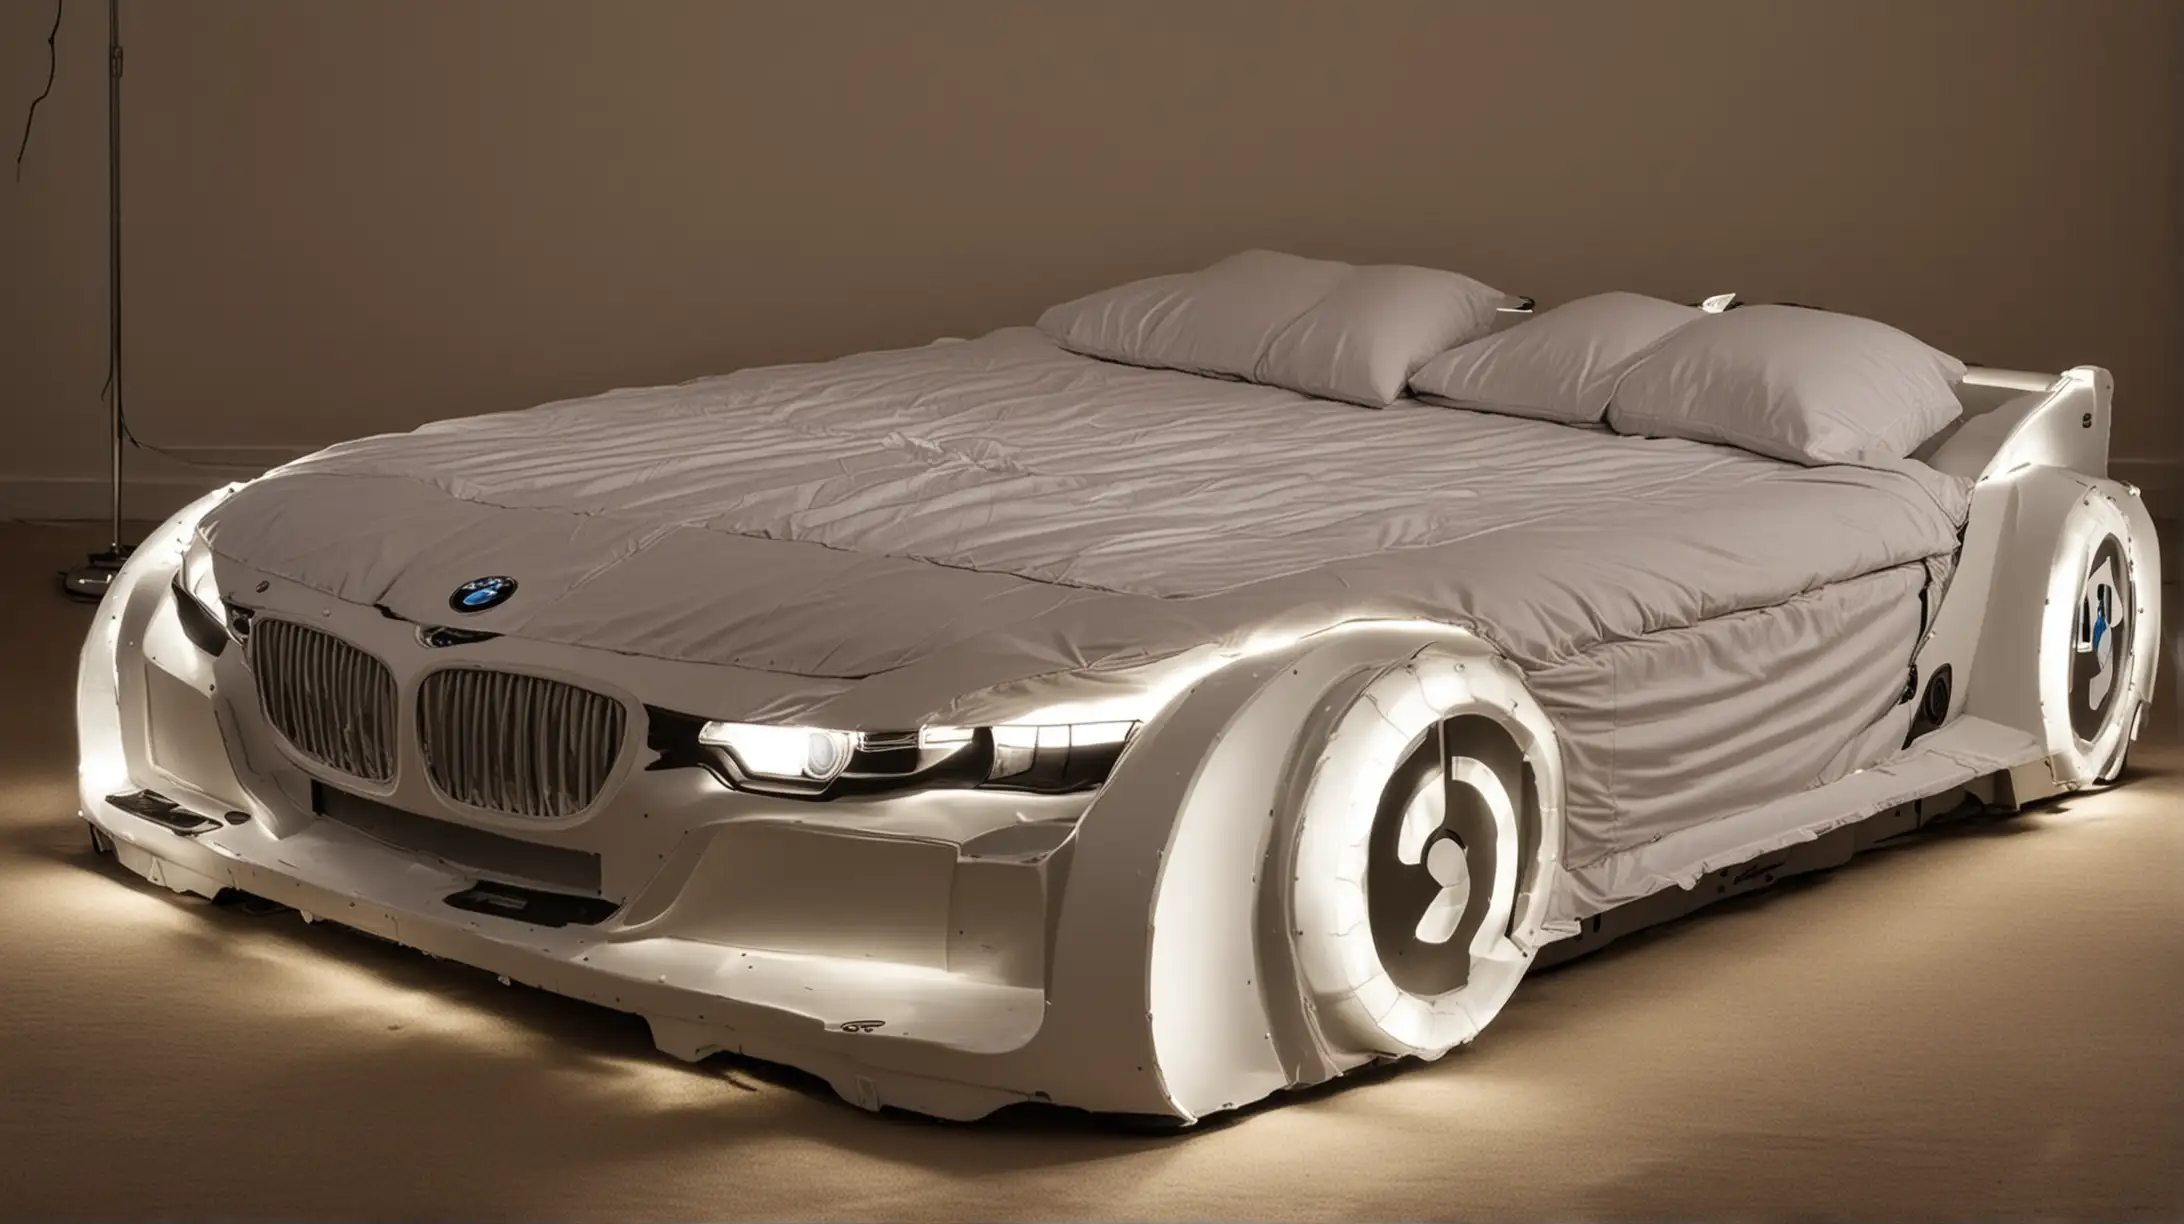 Luxurious Double Bed Shaped like BMW Car with Illuminated Headlights